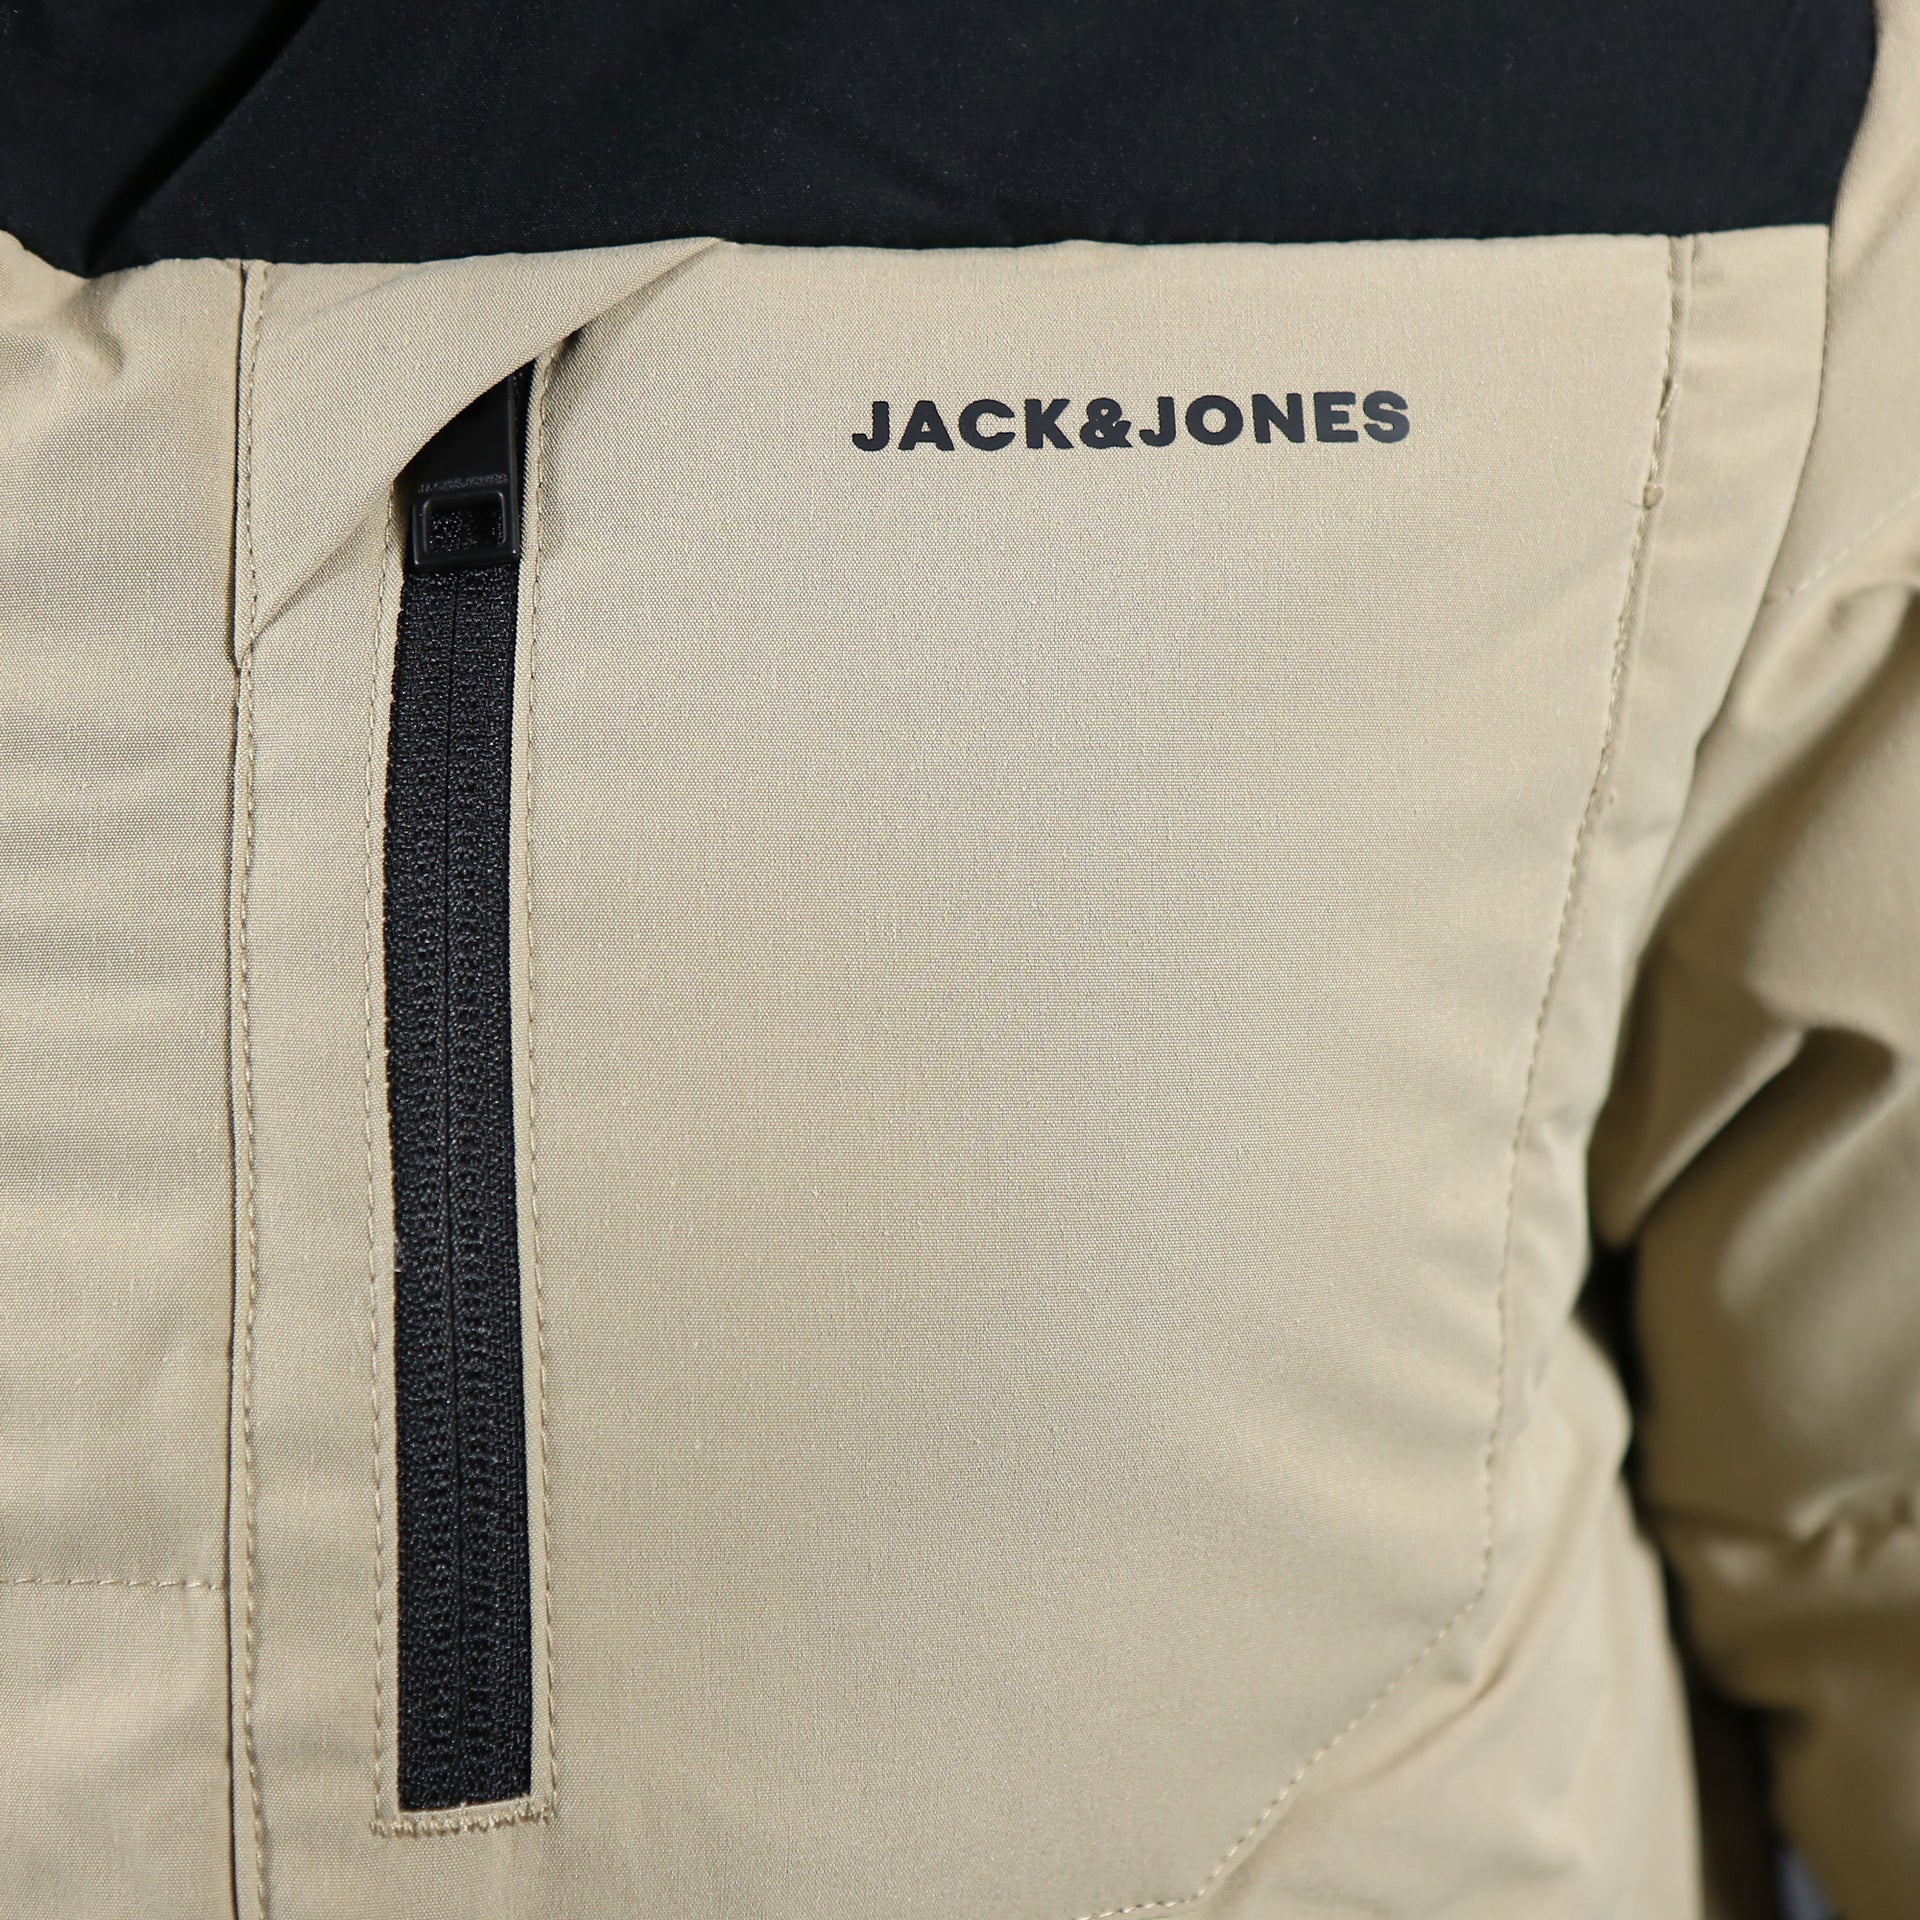 The Jack and jones chest pocket on the Jack And Jones Dune Puffer Jacket With Hidden Pocket | Black and Tan Puffer Jacket